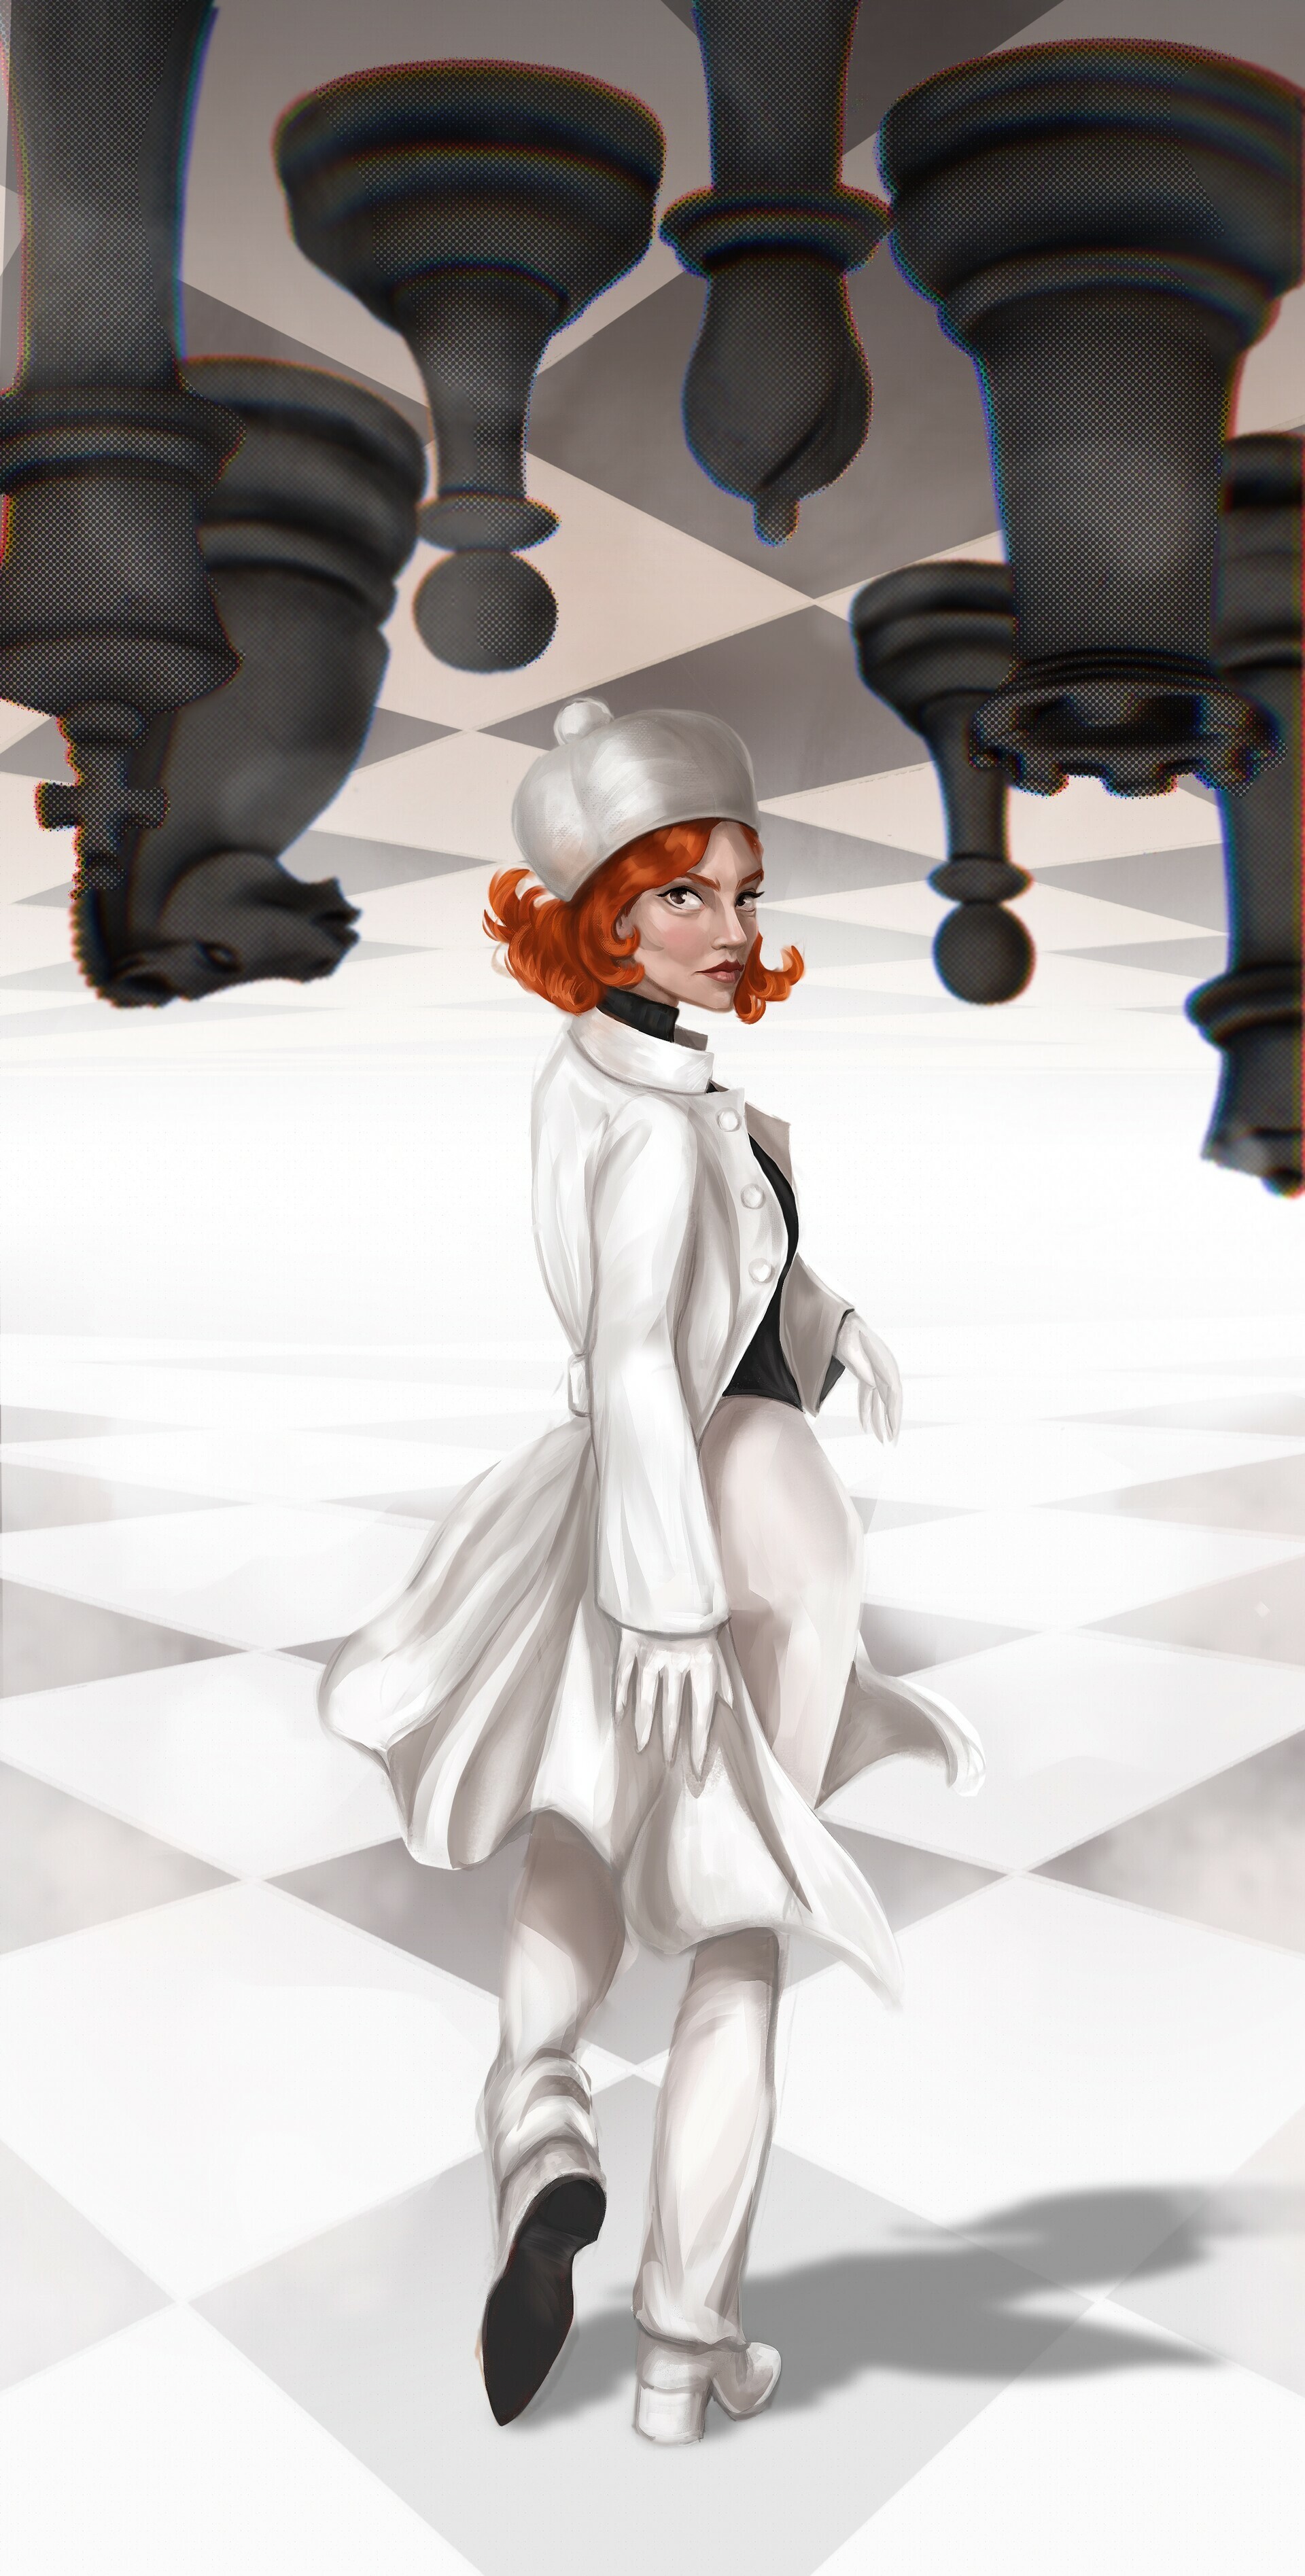 The Queen's Gambit: Art, Prodigious introvert Beth Harmon discovers and masters the game of chess in 1960s USA. 1920x3800 HD Background.